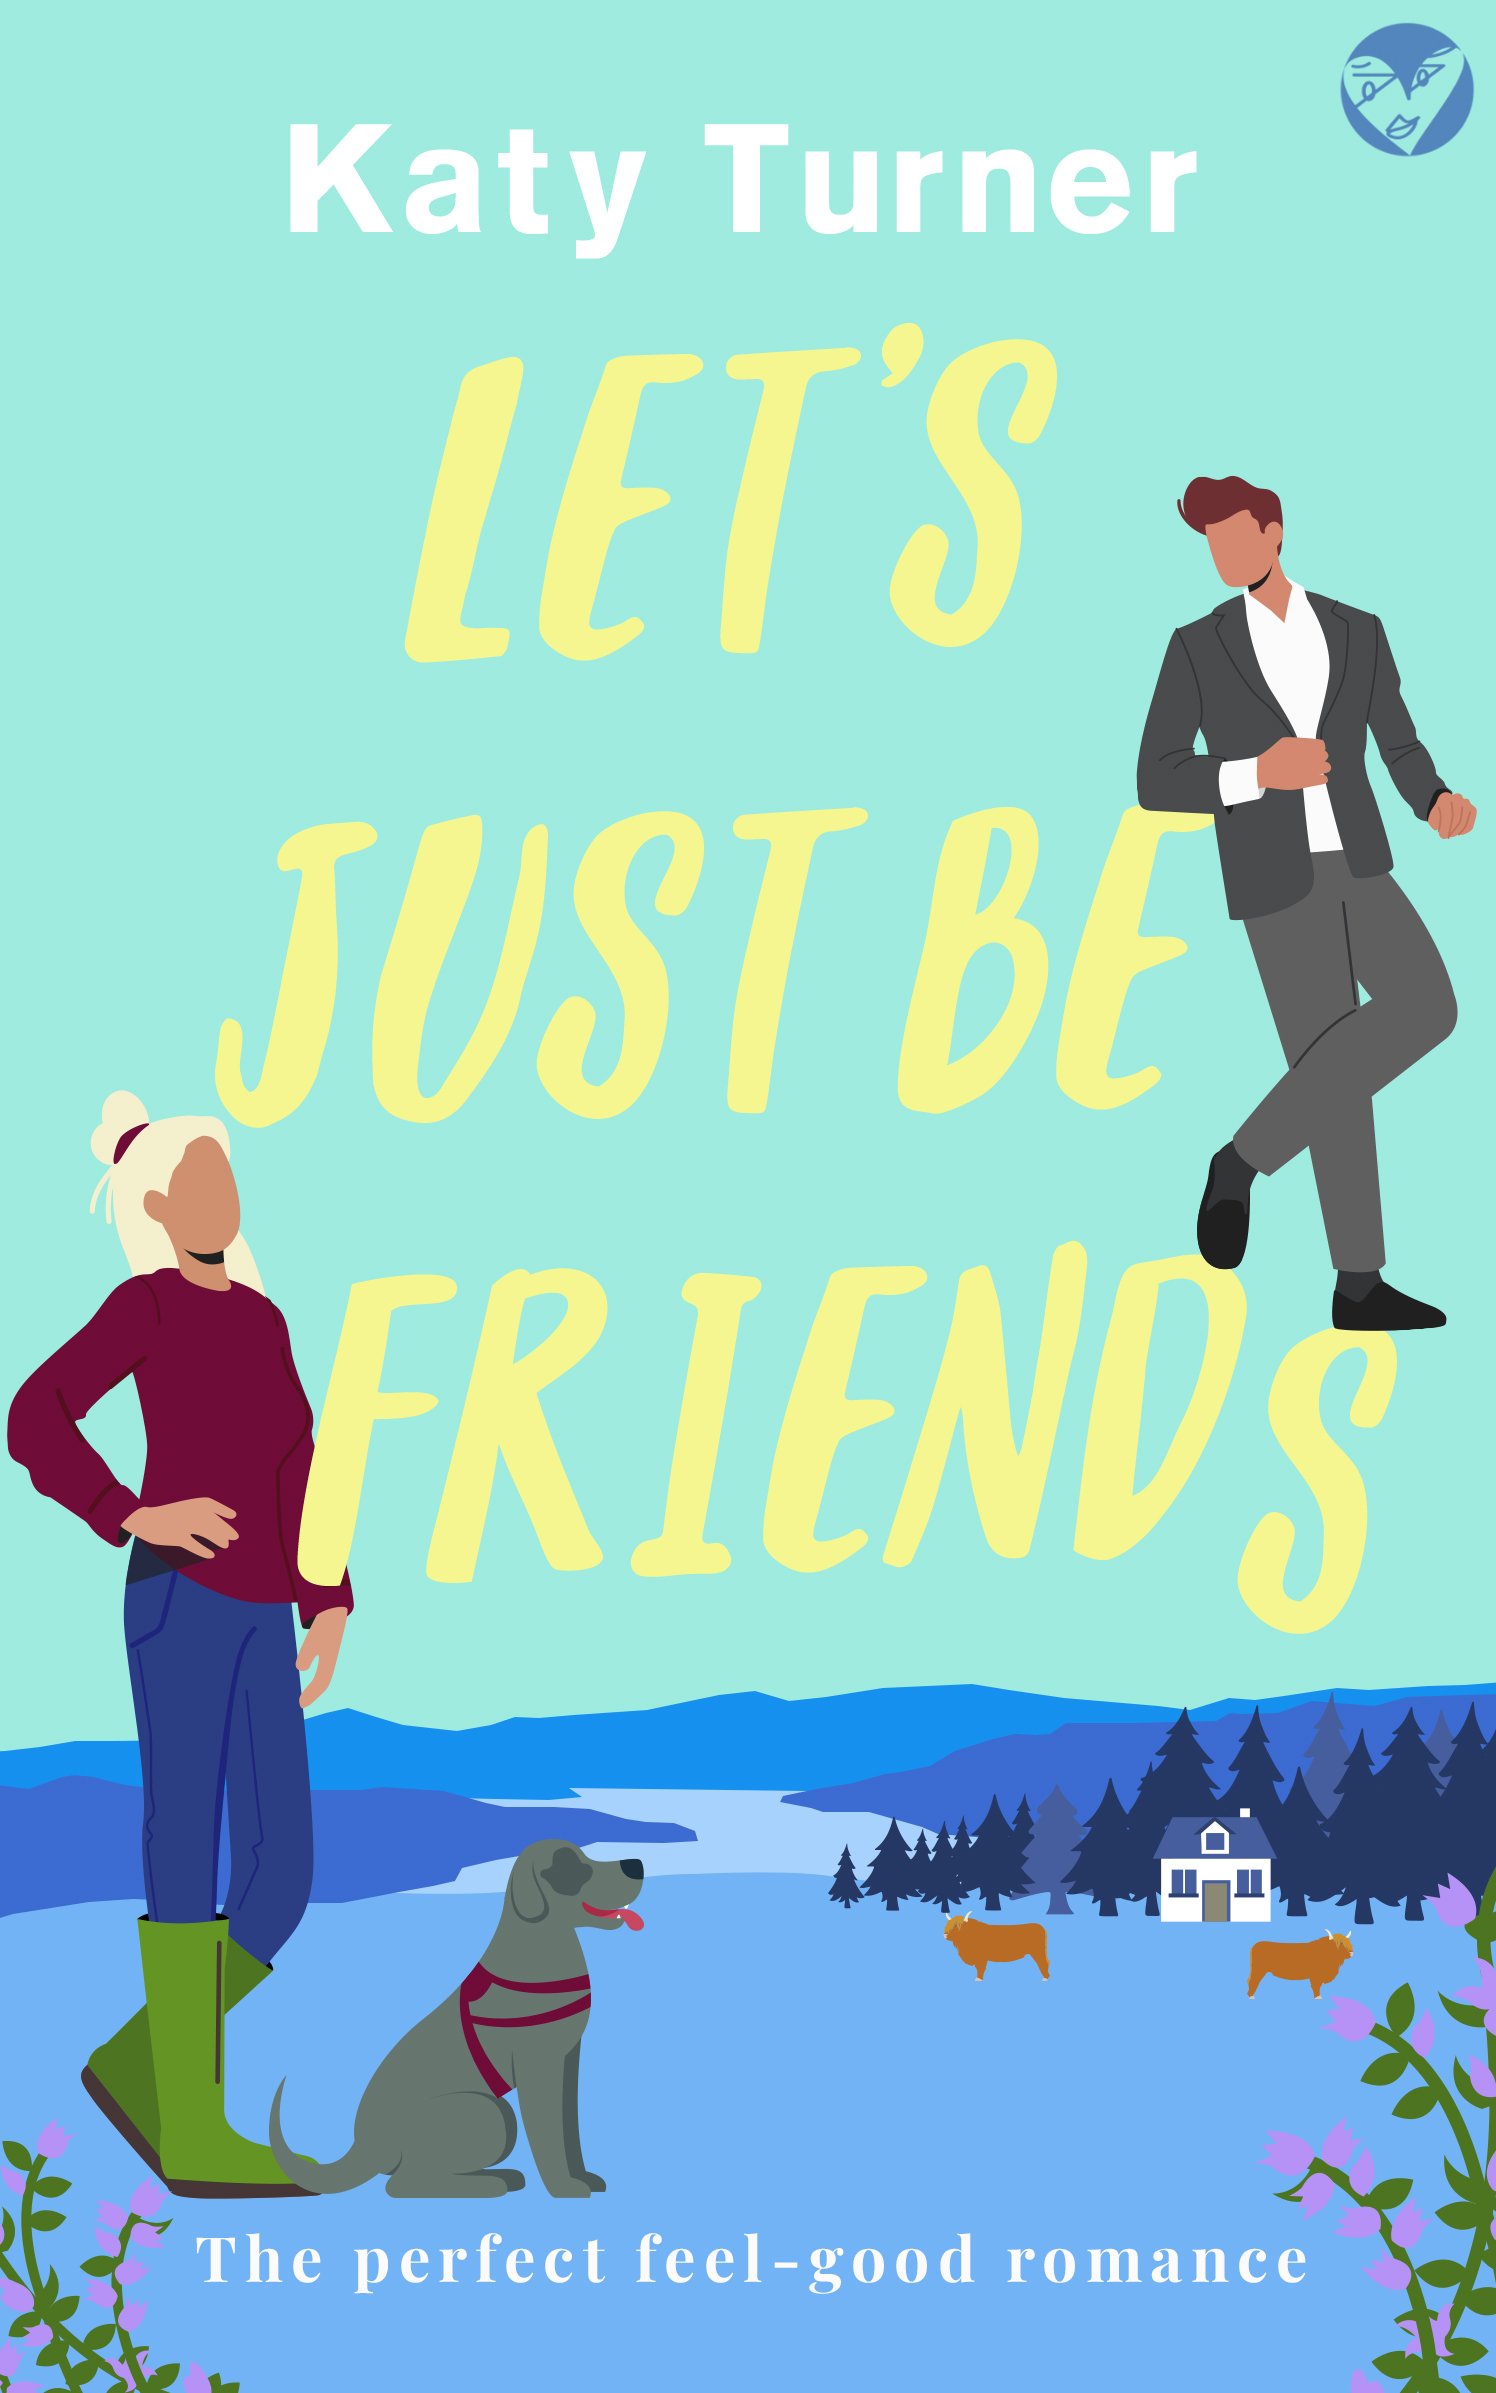 LET'S JUST BE FRIENDS Cover publish (3).jpg